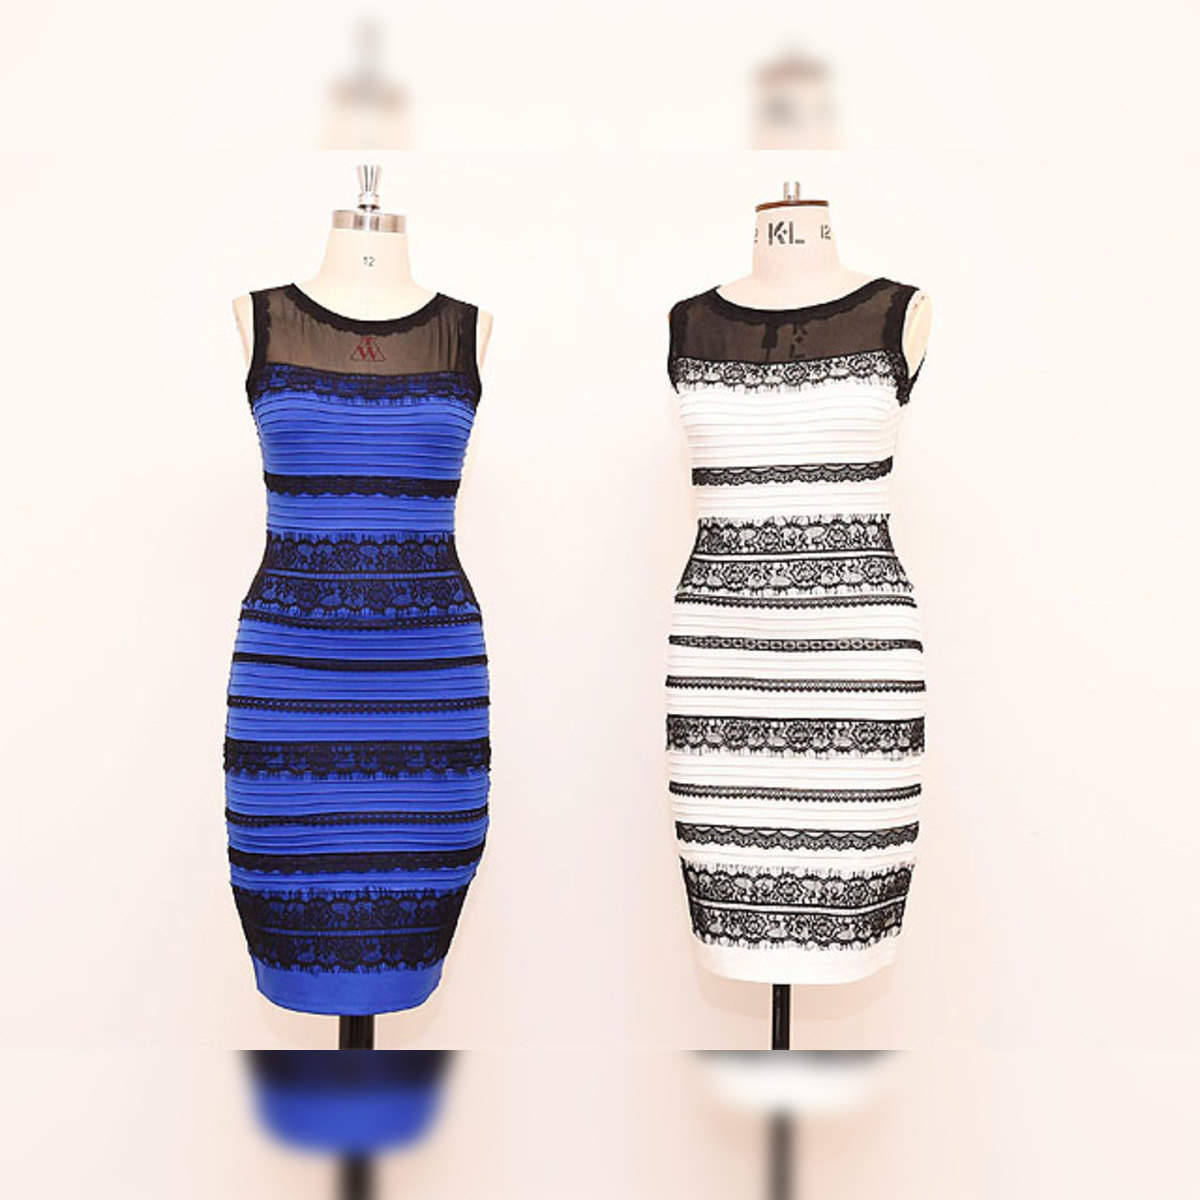 Here's why people saw “the dress” differently.